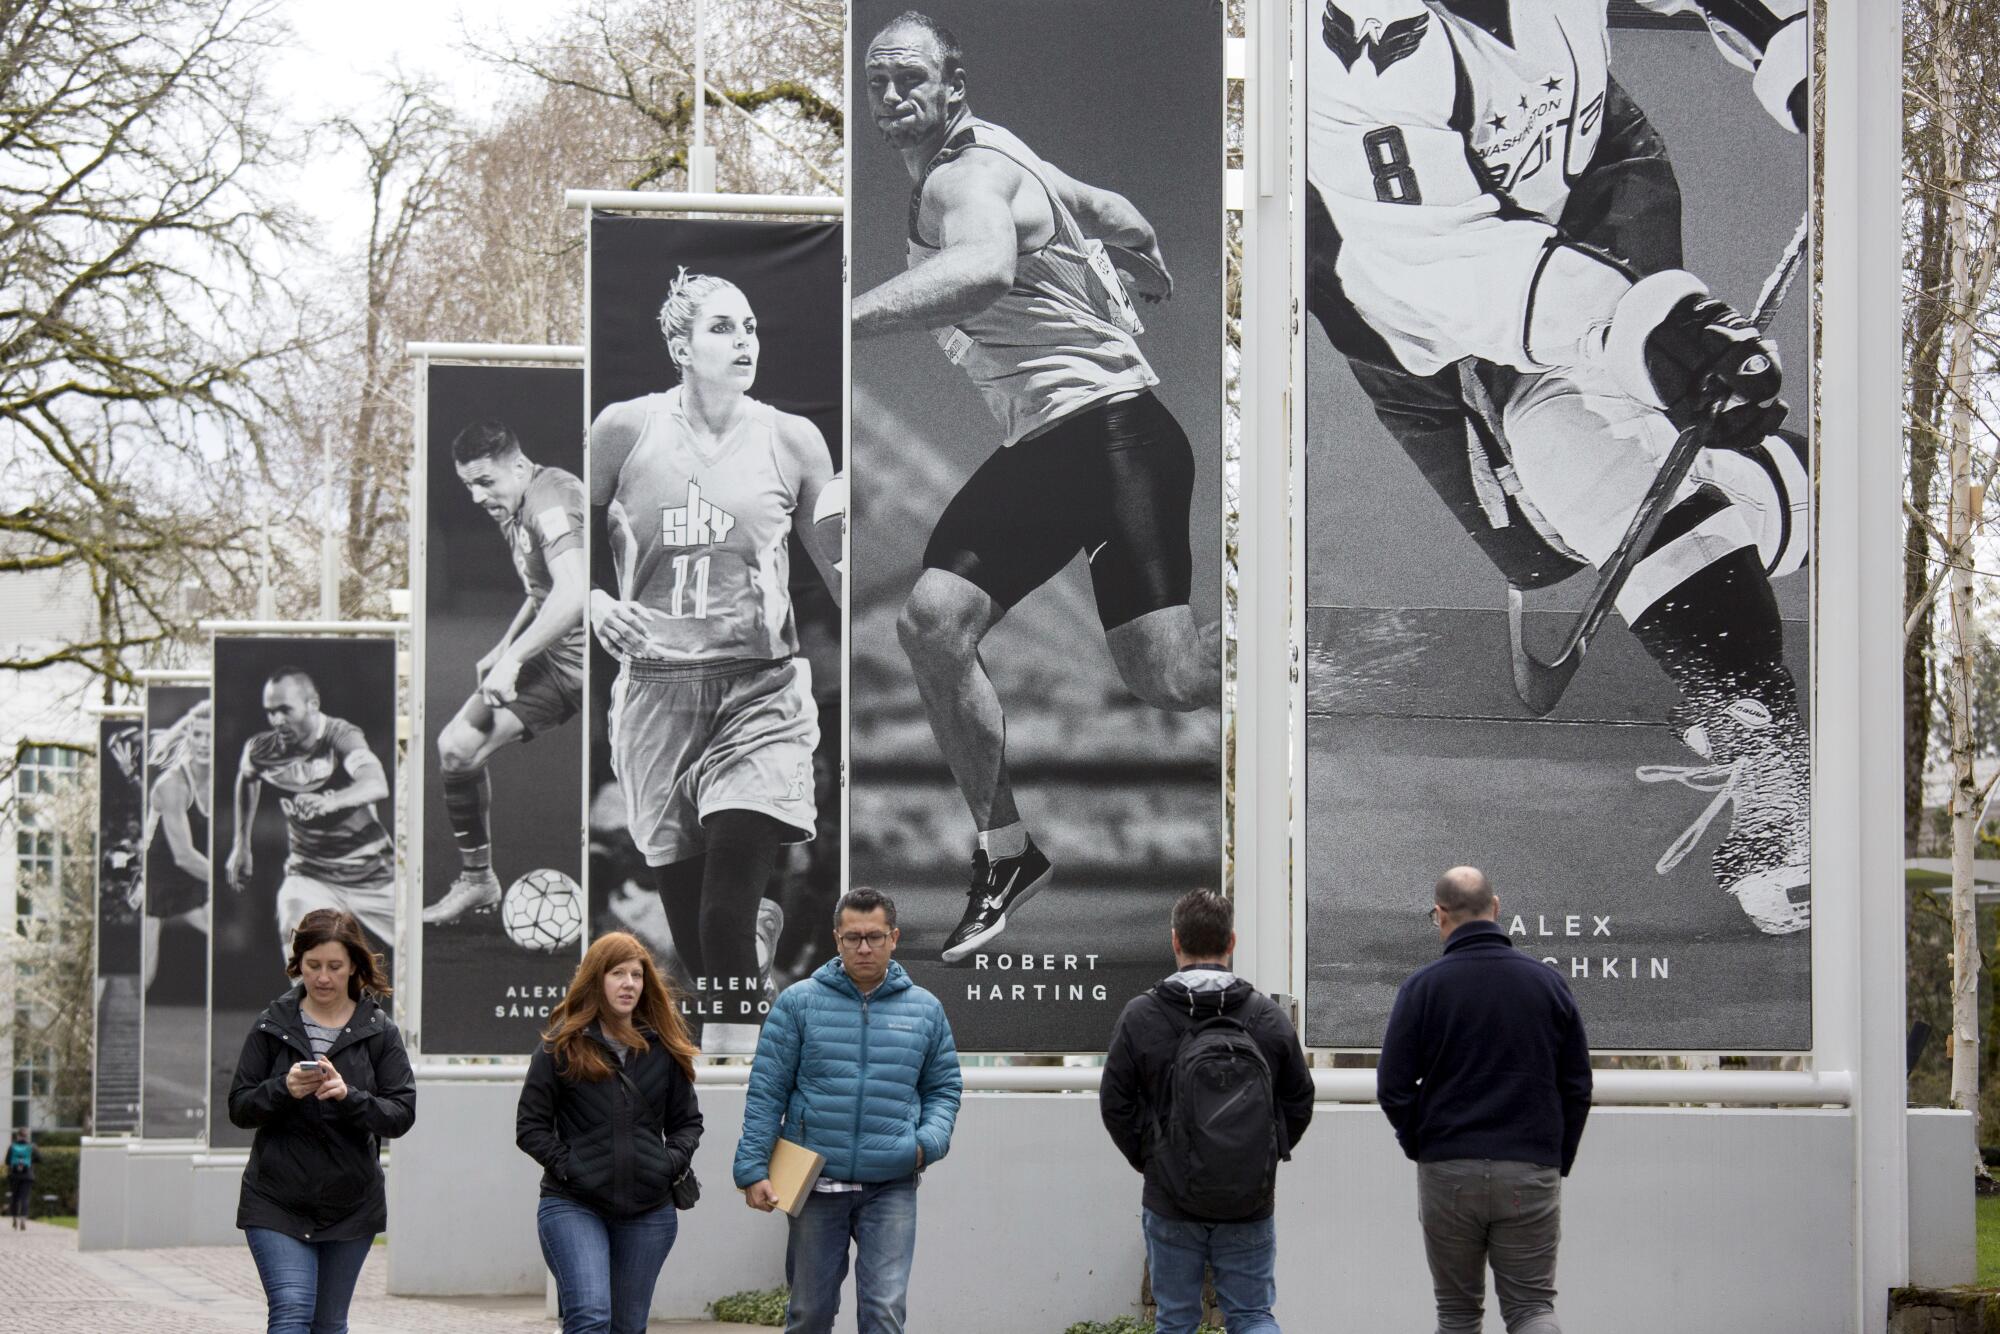 Several people walking on a sidewalk next to a series of black-and-white banners depicting athletes.